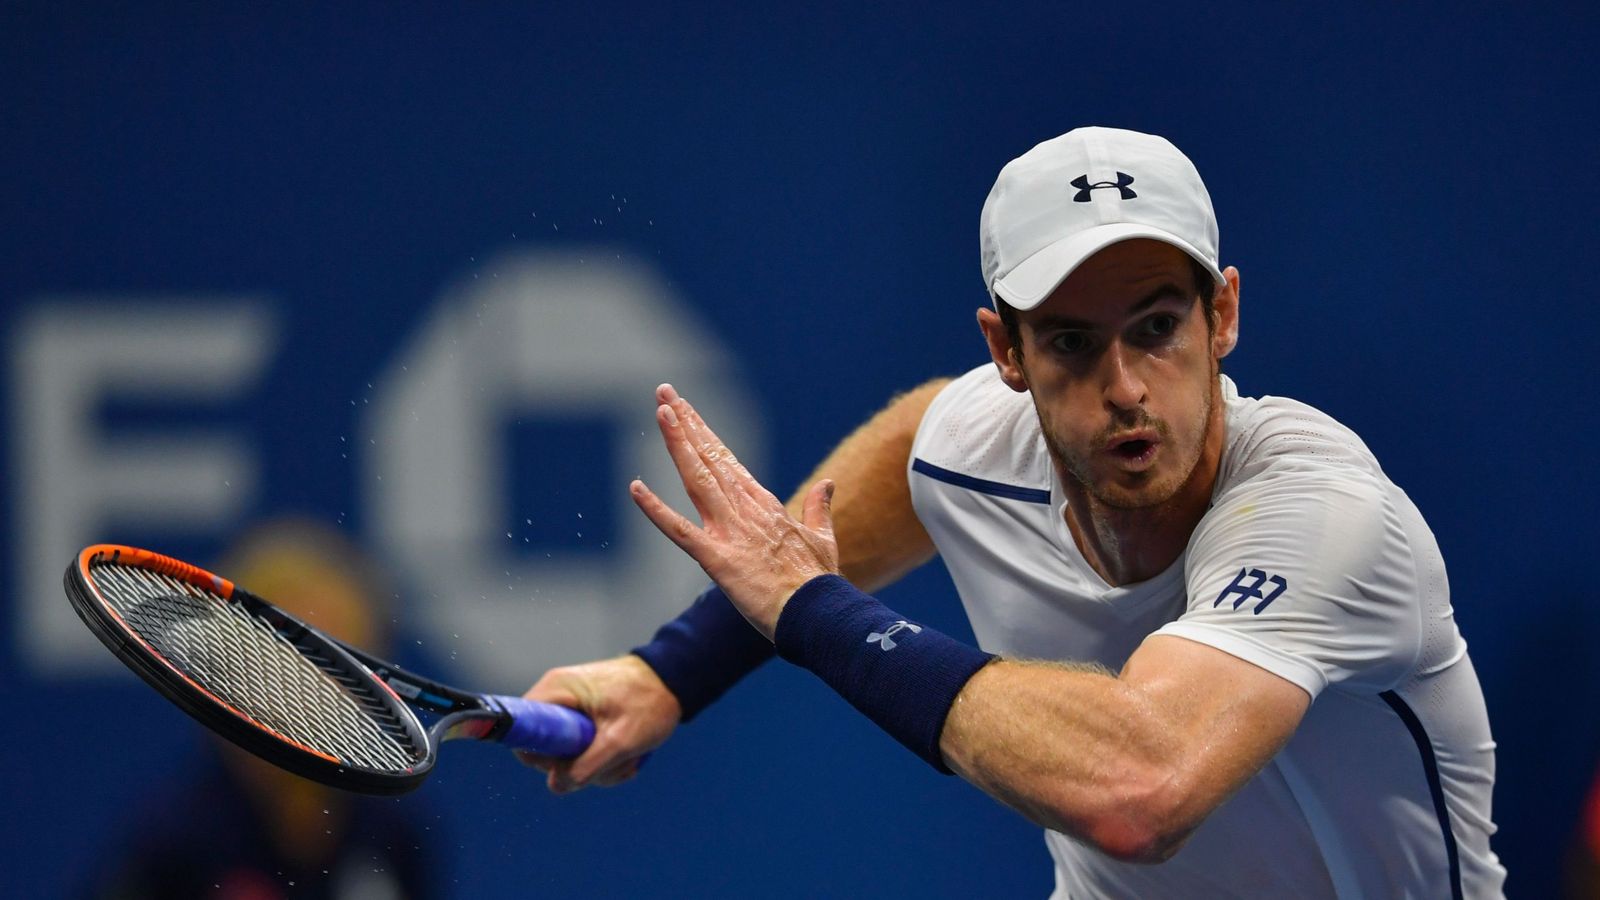 US Open Andy Murray defeats Marcel Granollers in straight sets